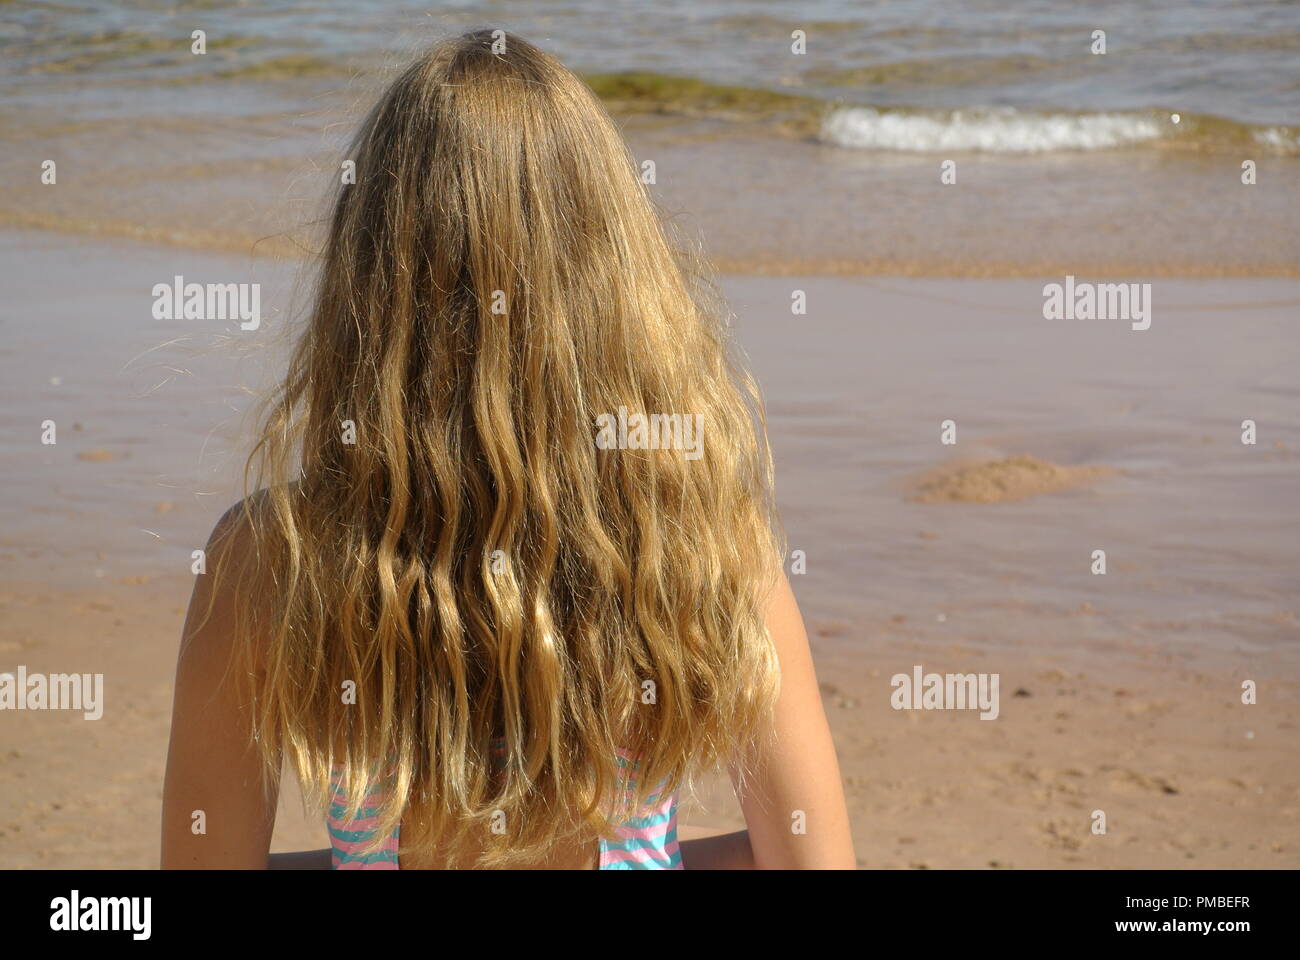 A close-up of a beautiful young girl with long blond and wavy beach hair standing on a beach and looking at the ocean on a sunny day, back view Stock Photo